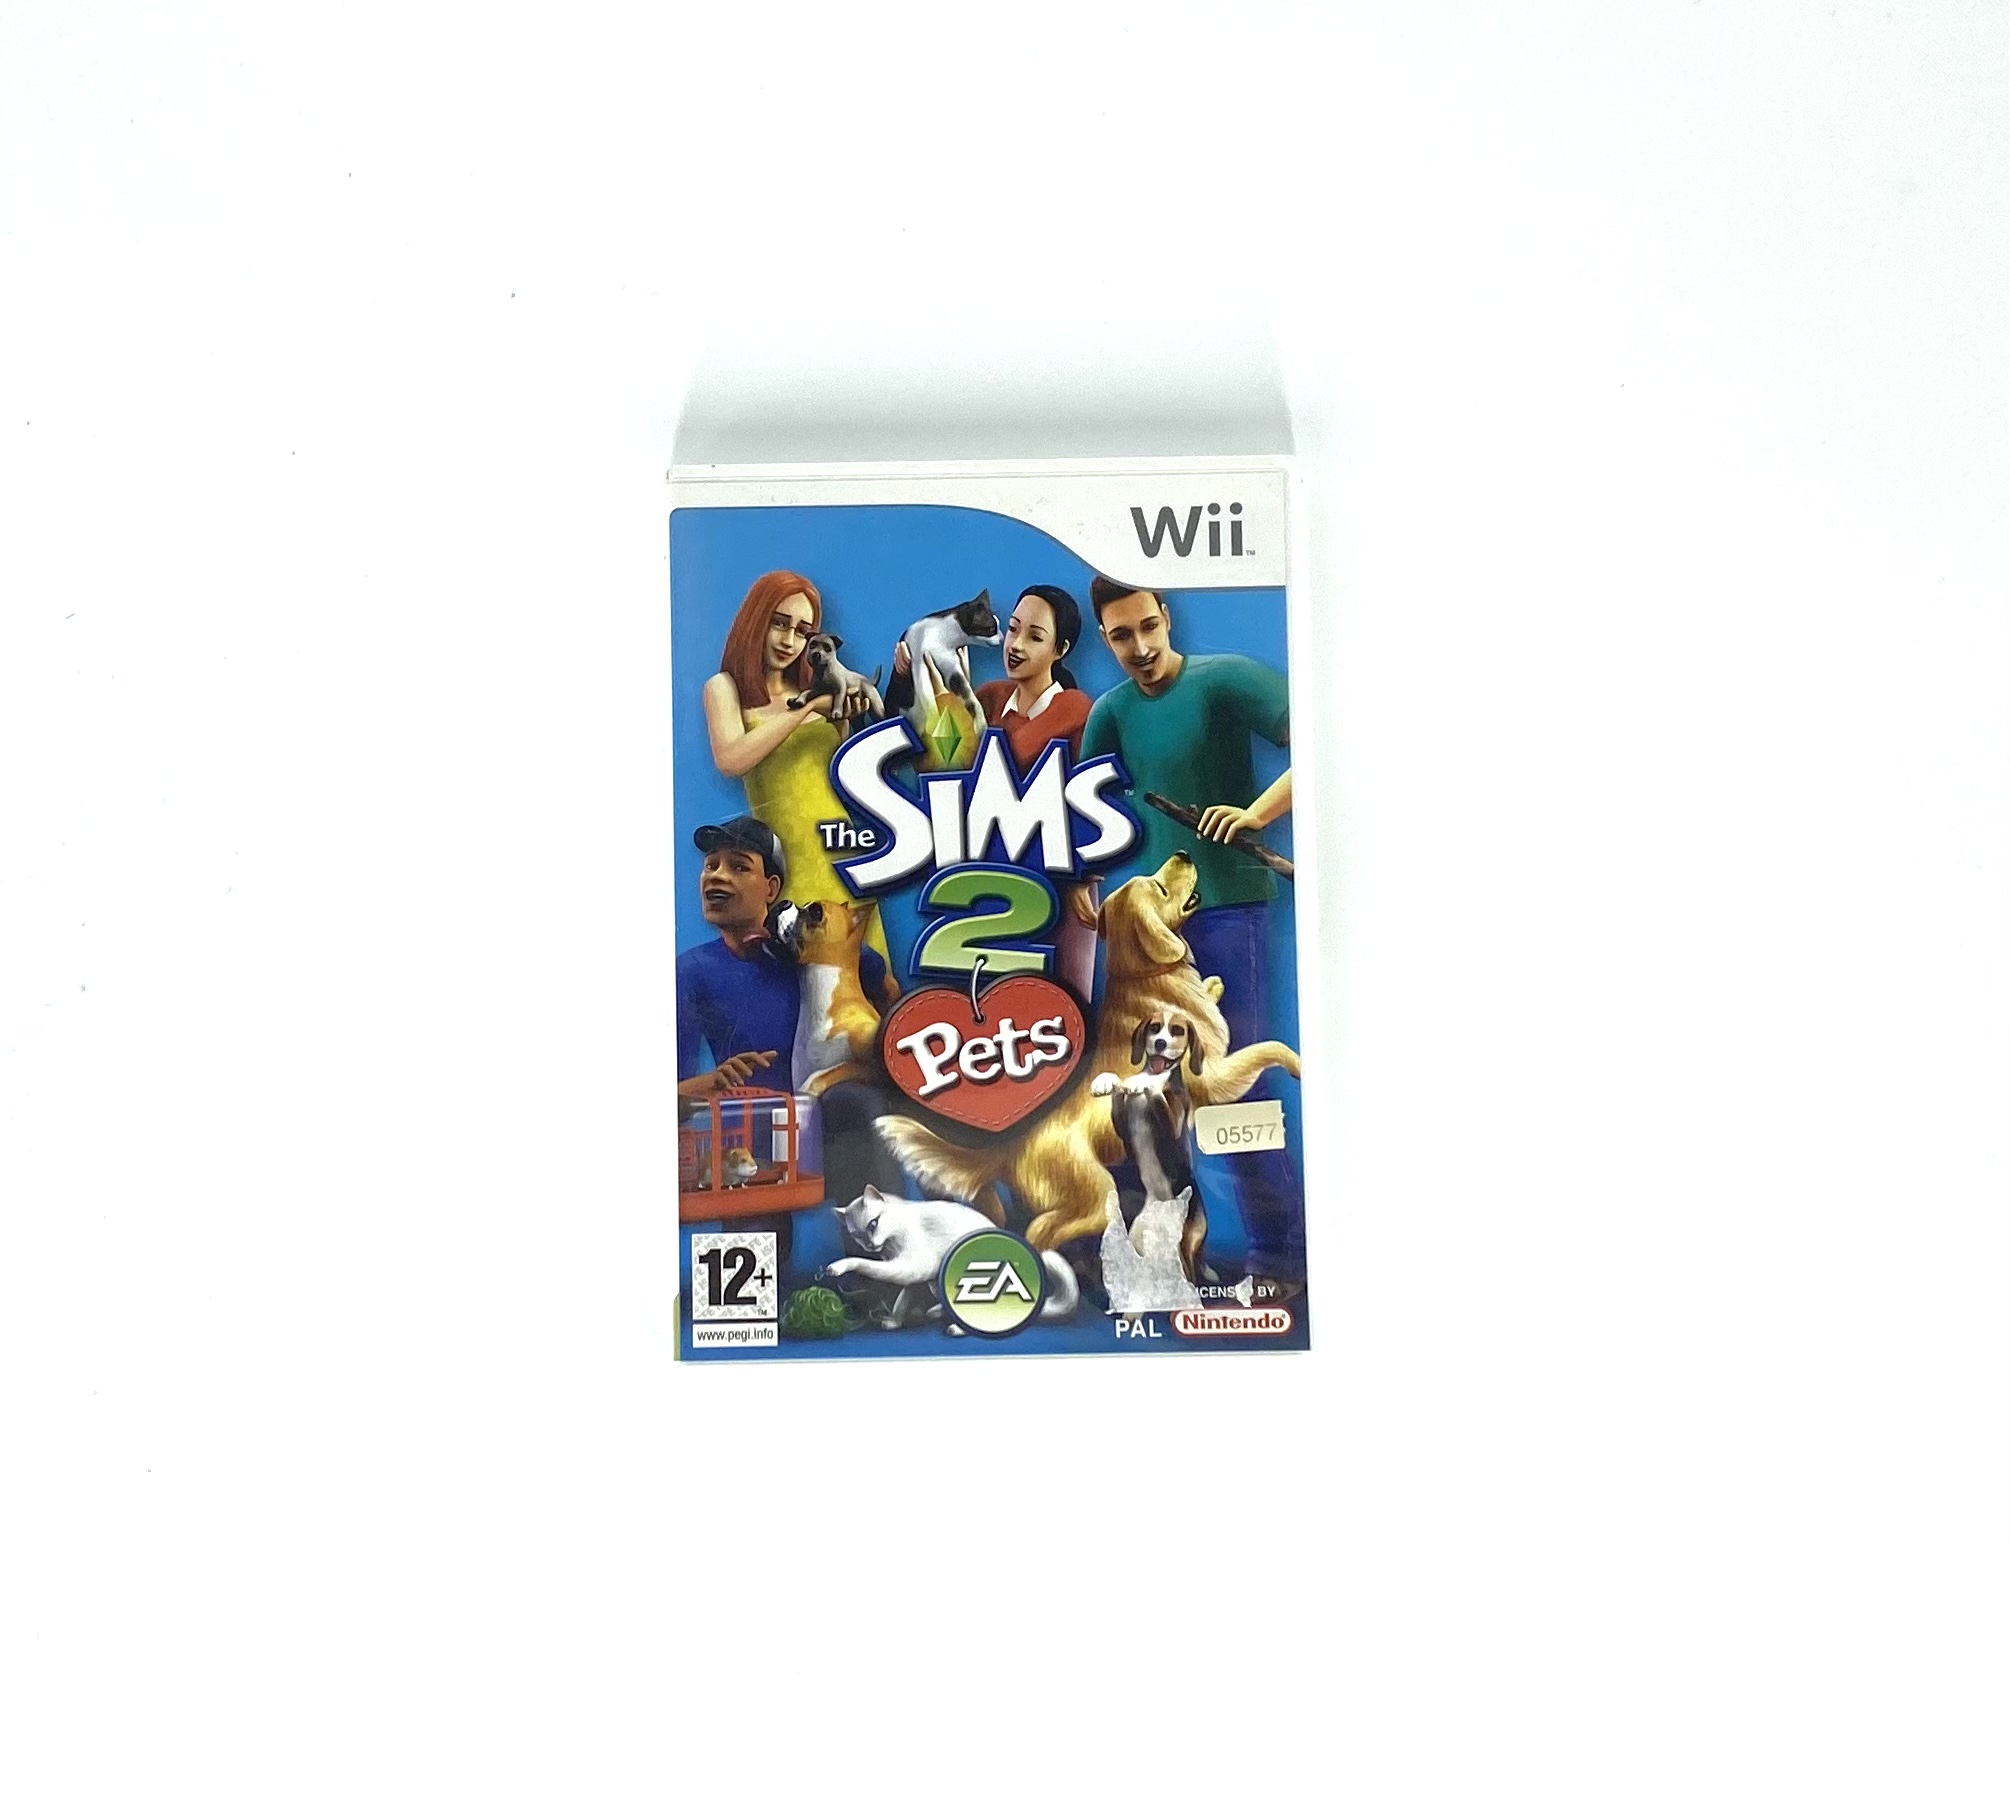 Sims 2 Pets - Wii